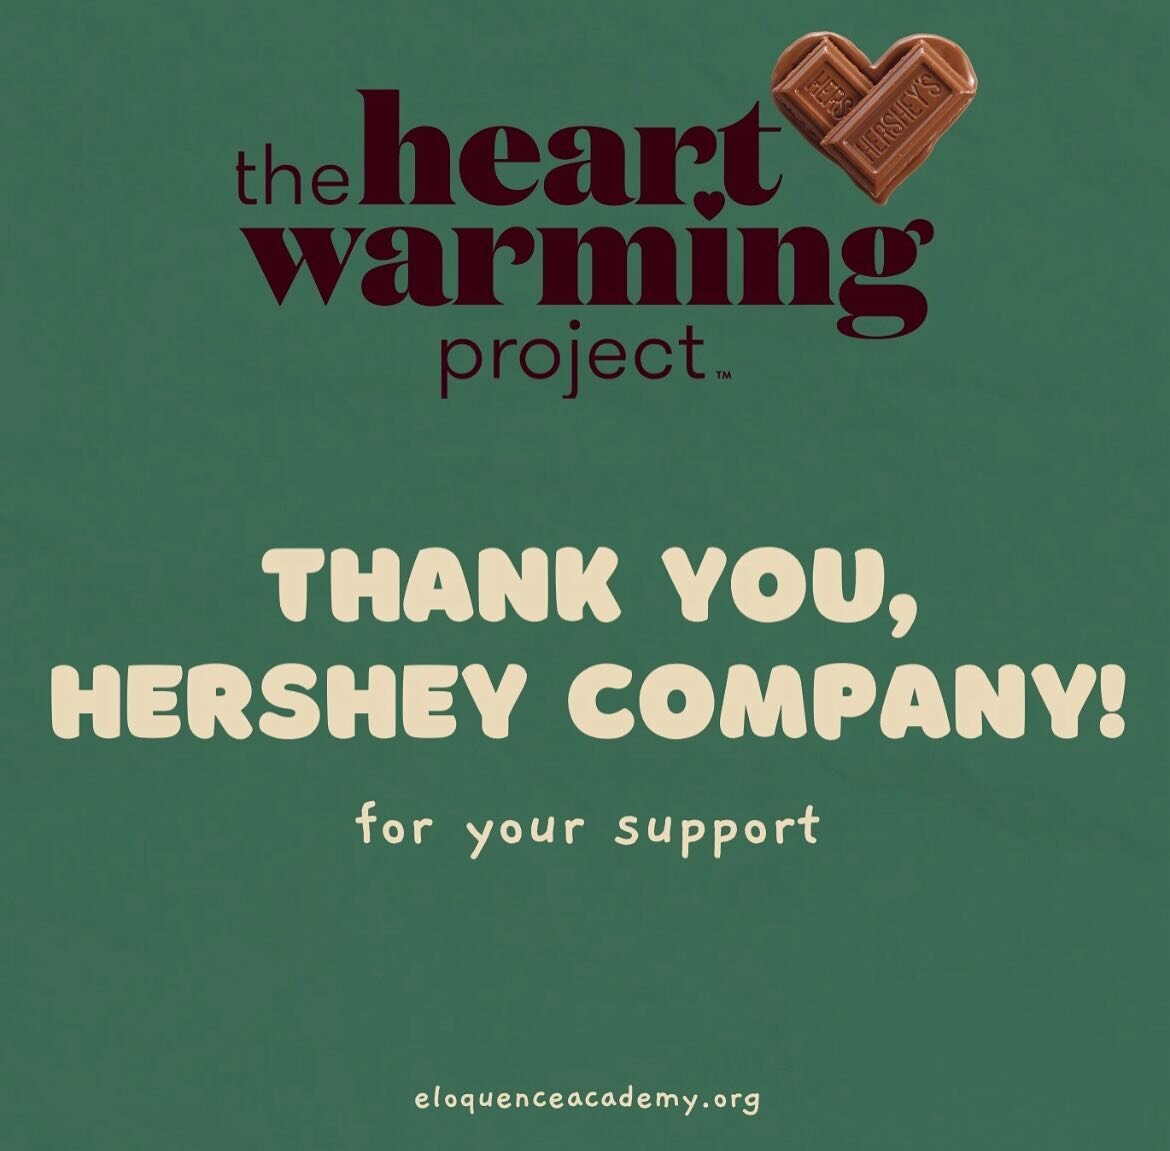 Eloquence Academy recently received a generous grant from the Hershey Company and Youth Service America (YSA). Since its inception in 2018, The Heartwarming Project has a history in supporting youth education and service programs worldwide. With this